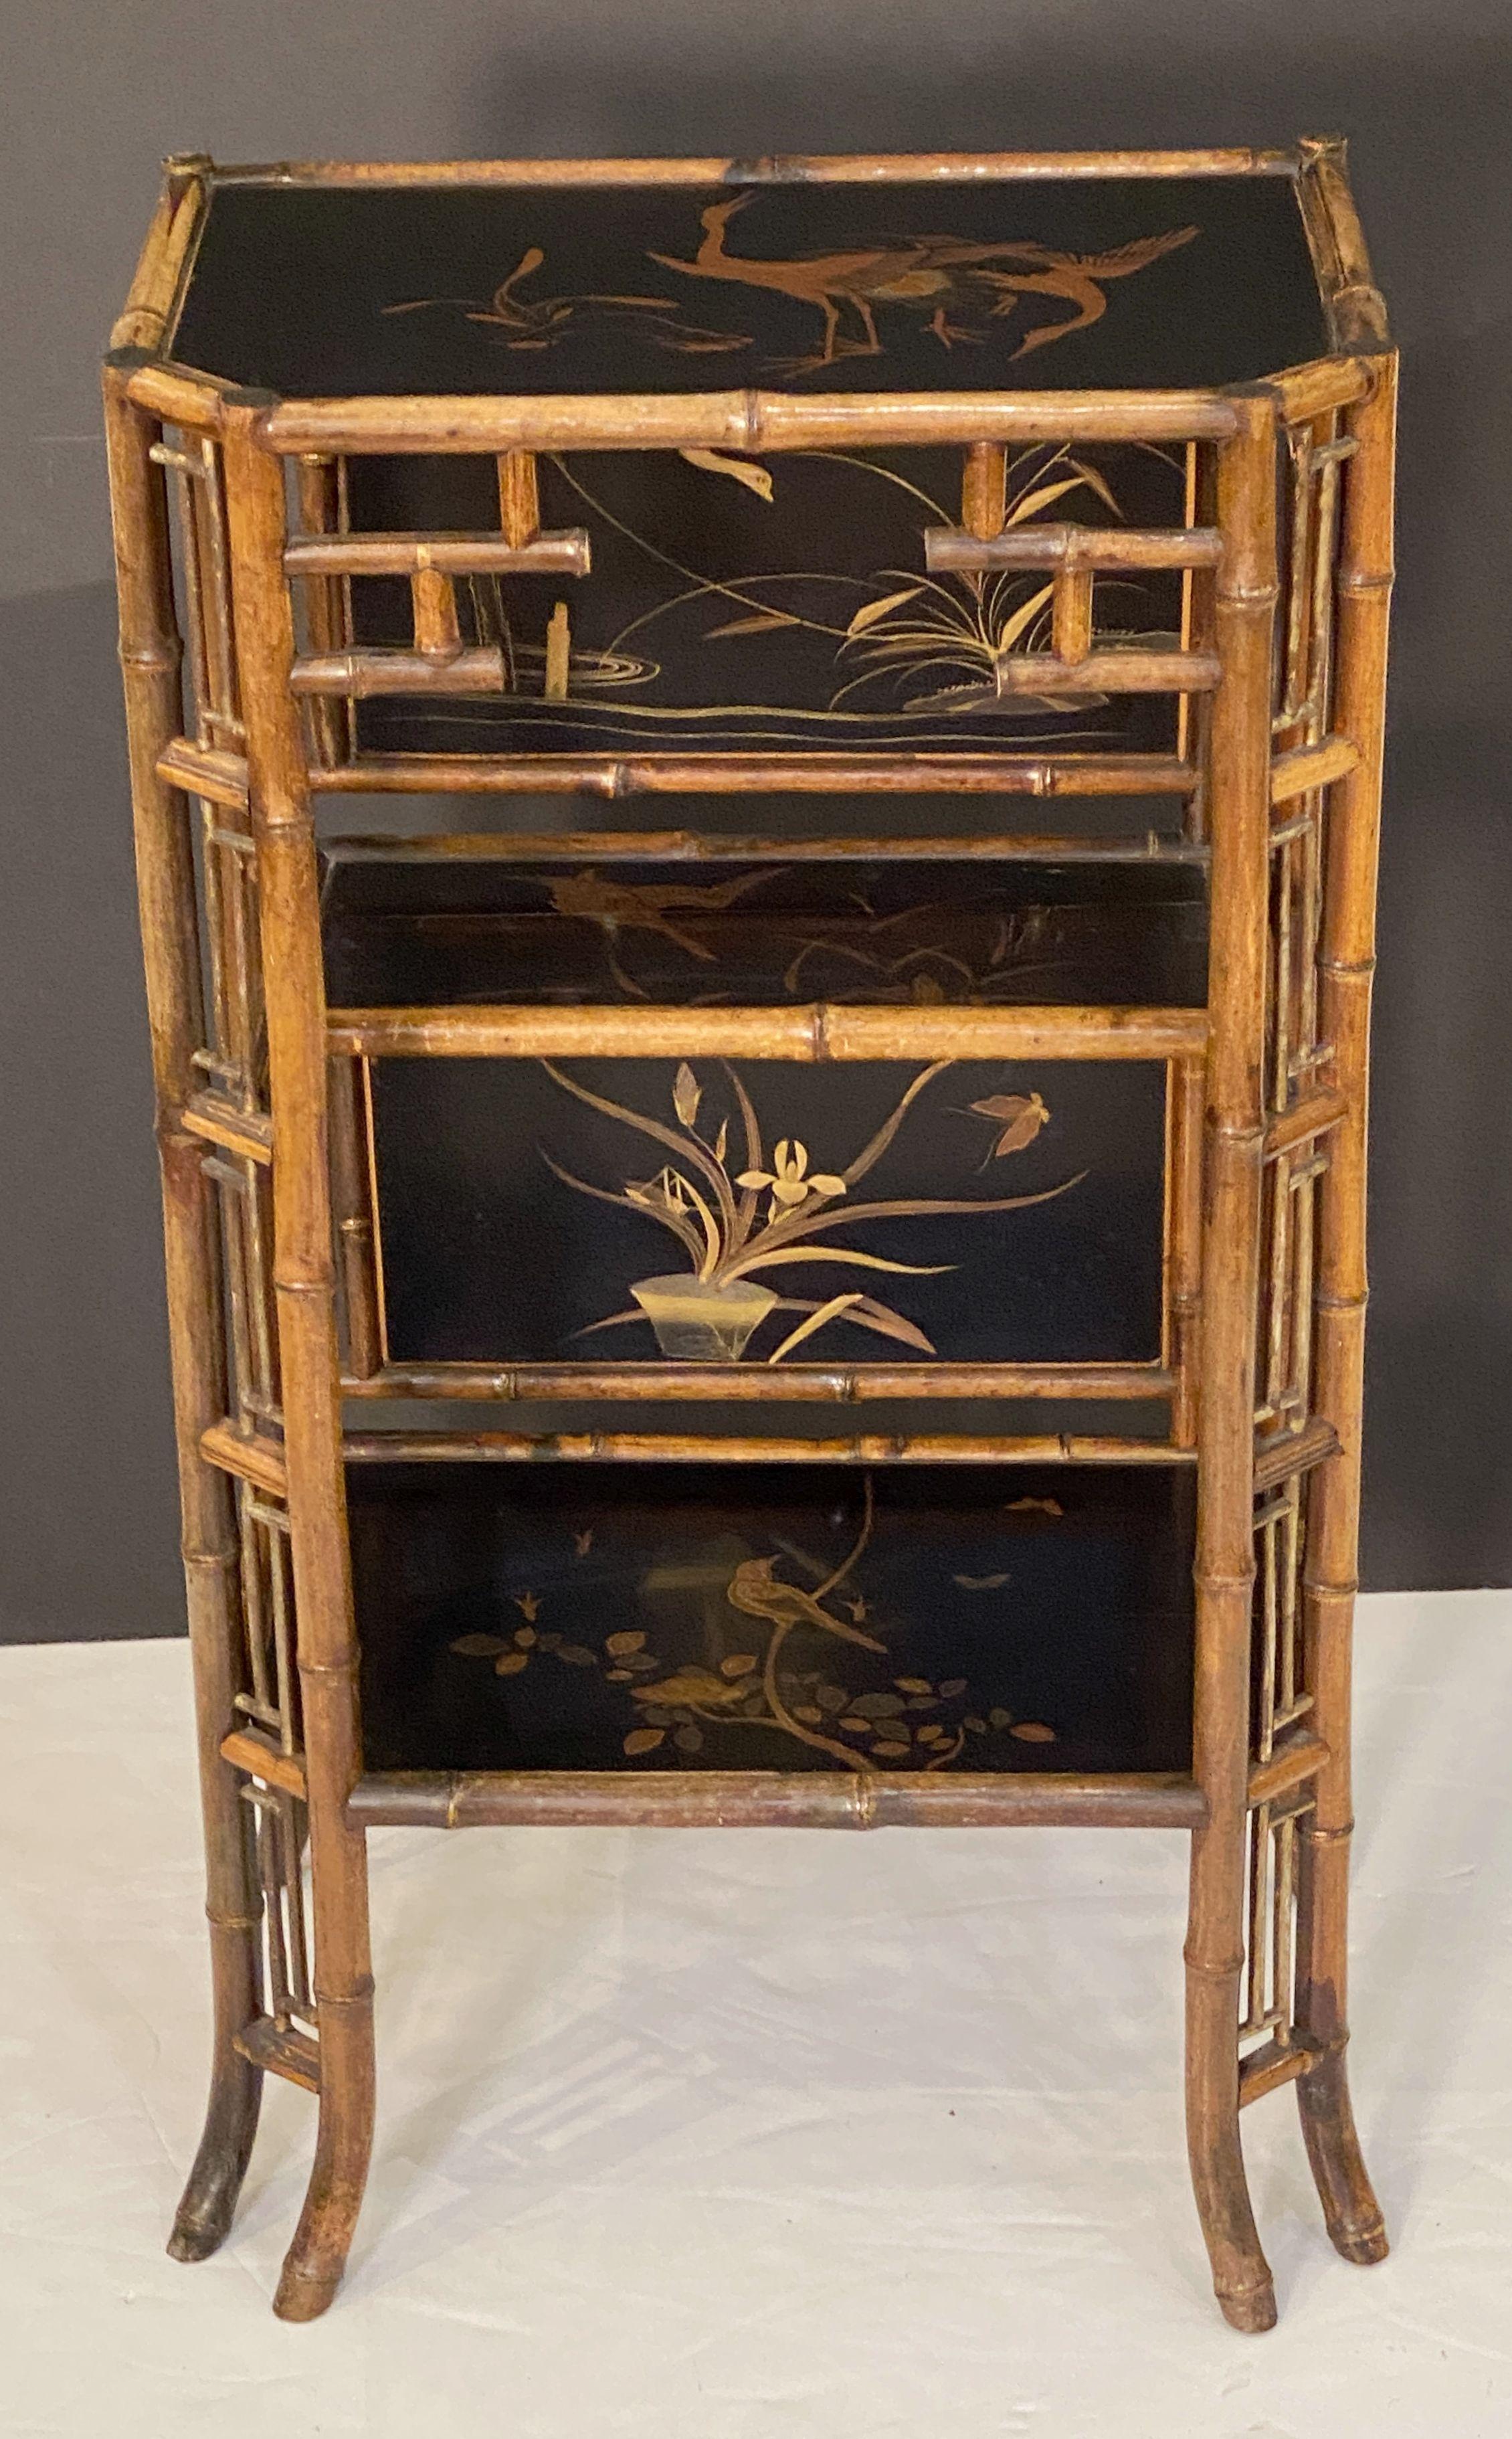 Gilt English Bamboo Table Stand or Cabinet Etagere from the Aesthetic Movement